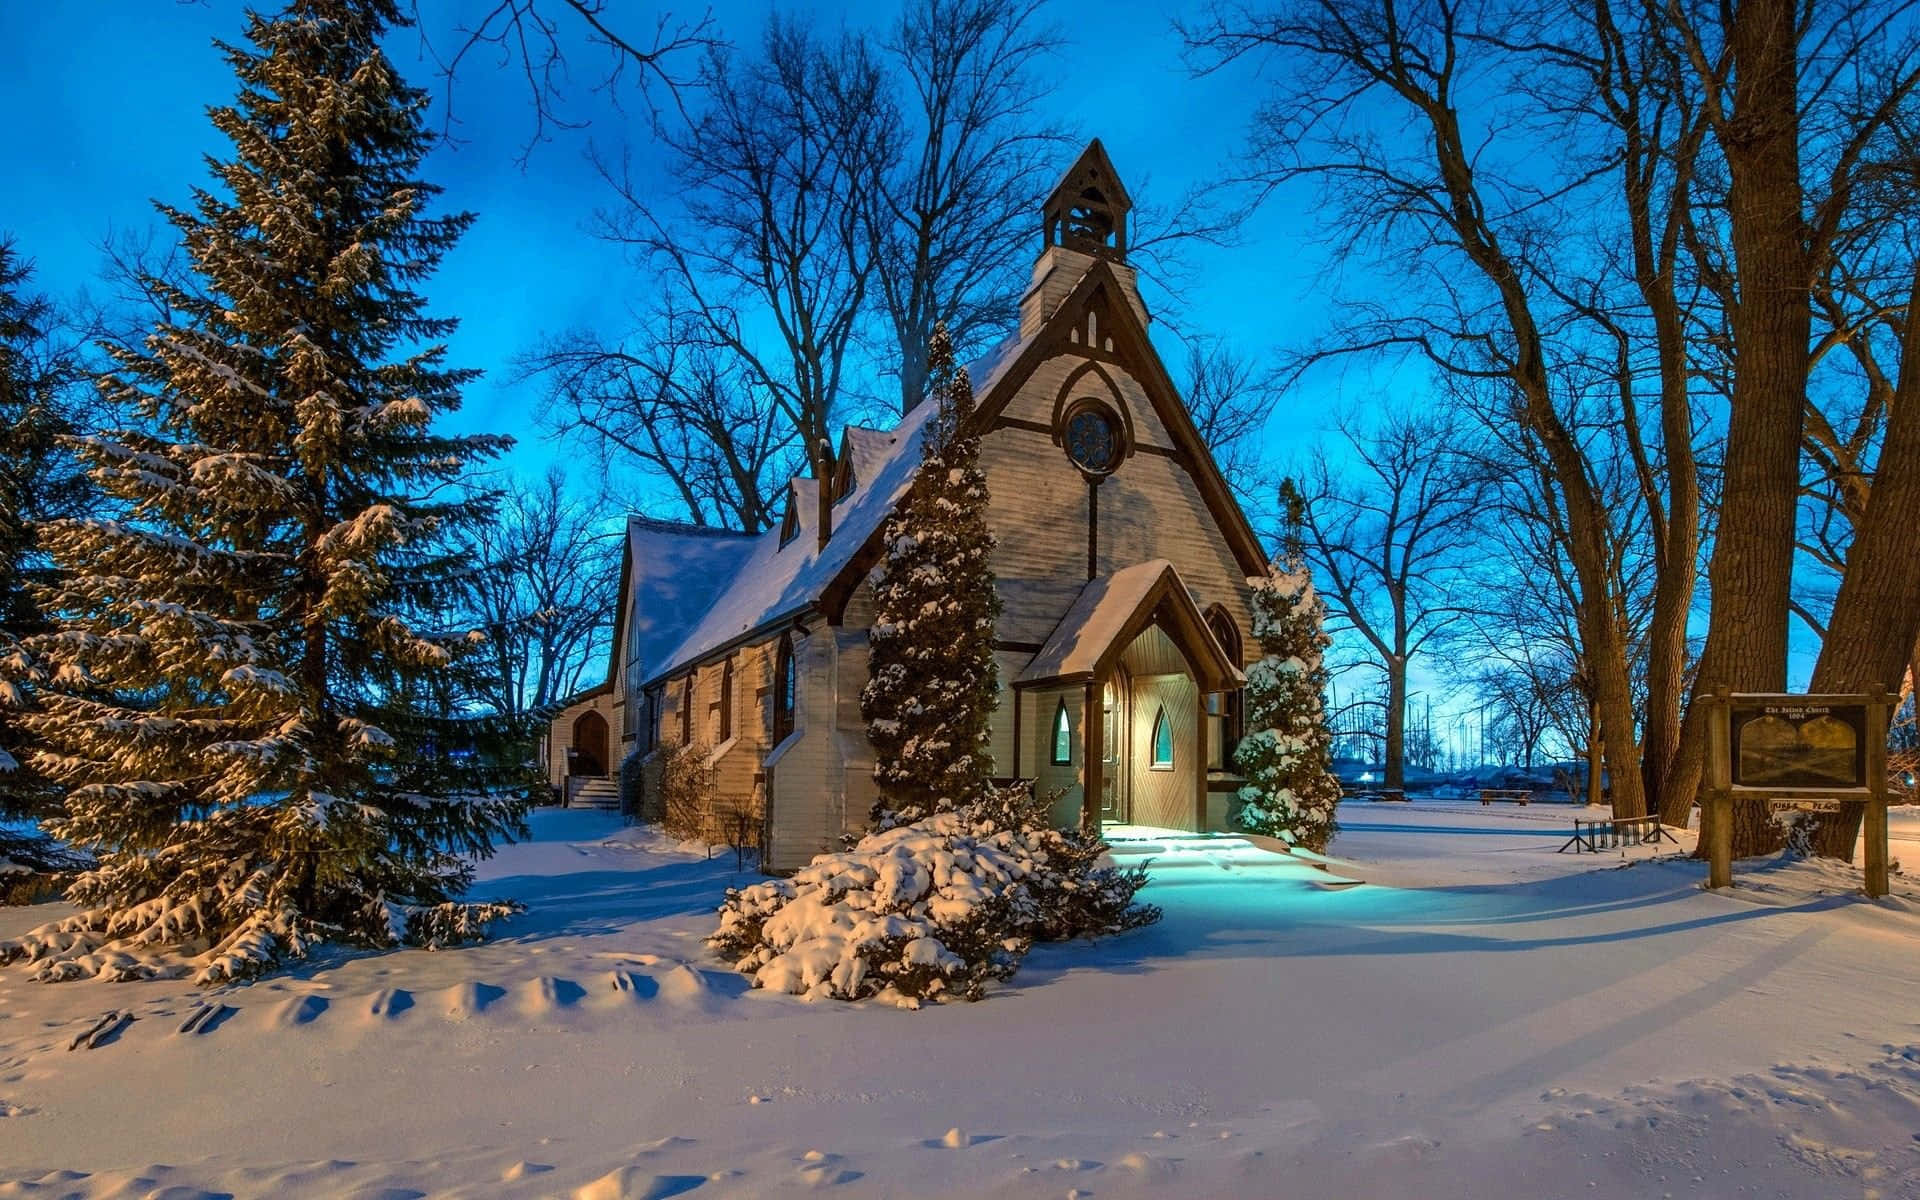 Winter Holiday Desktop Church With Pine Trees Wallpaper